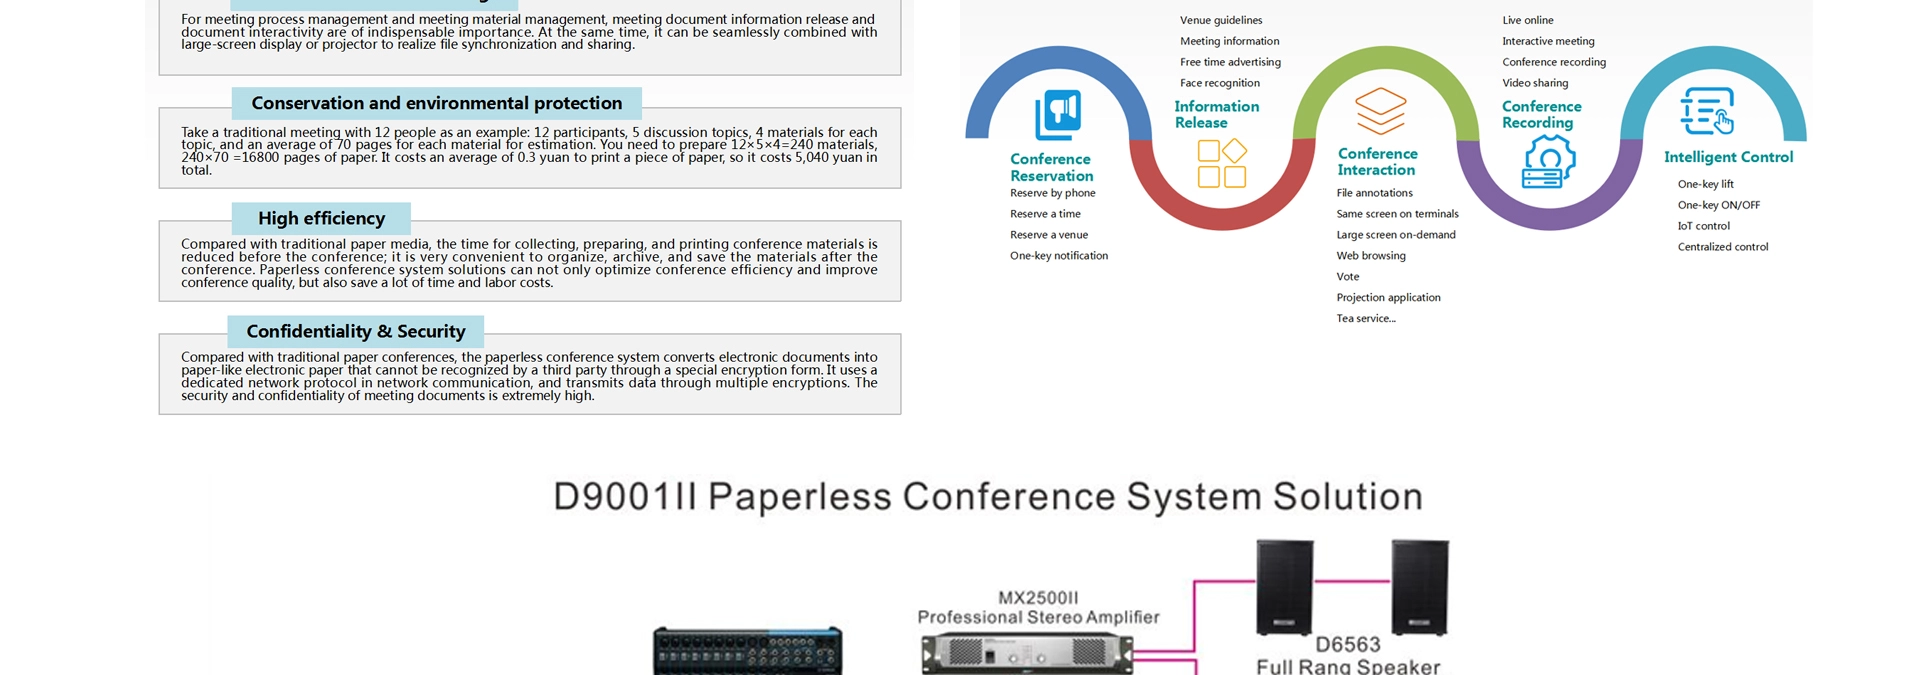 Paperless Conference System Document Server